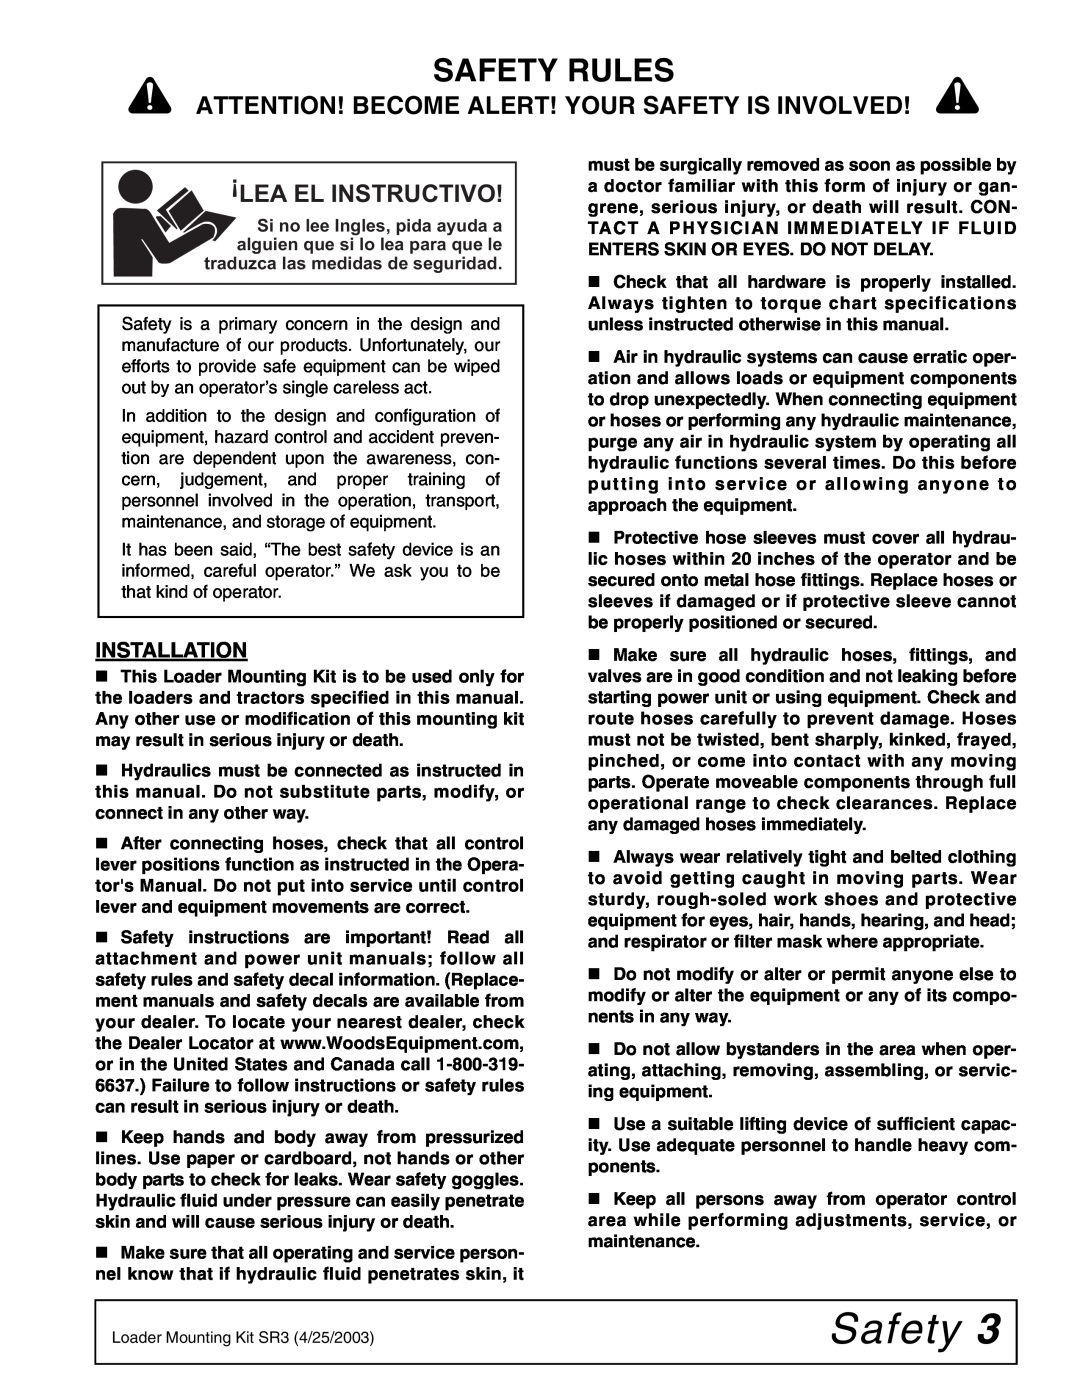 Woods Equipment 211822 installation manual Safety Rules, Installation, Attention! Become Alert! Your Safety Is Involved 